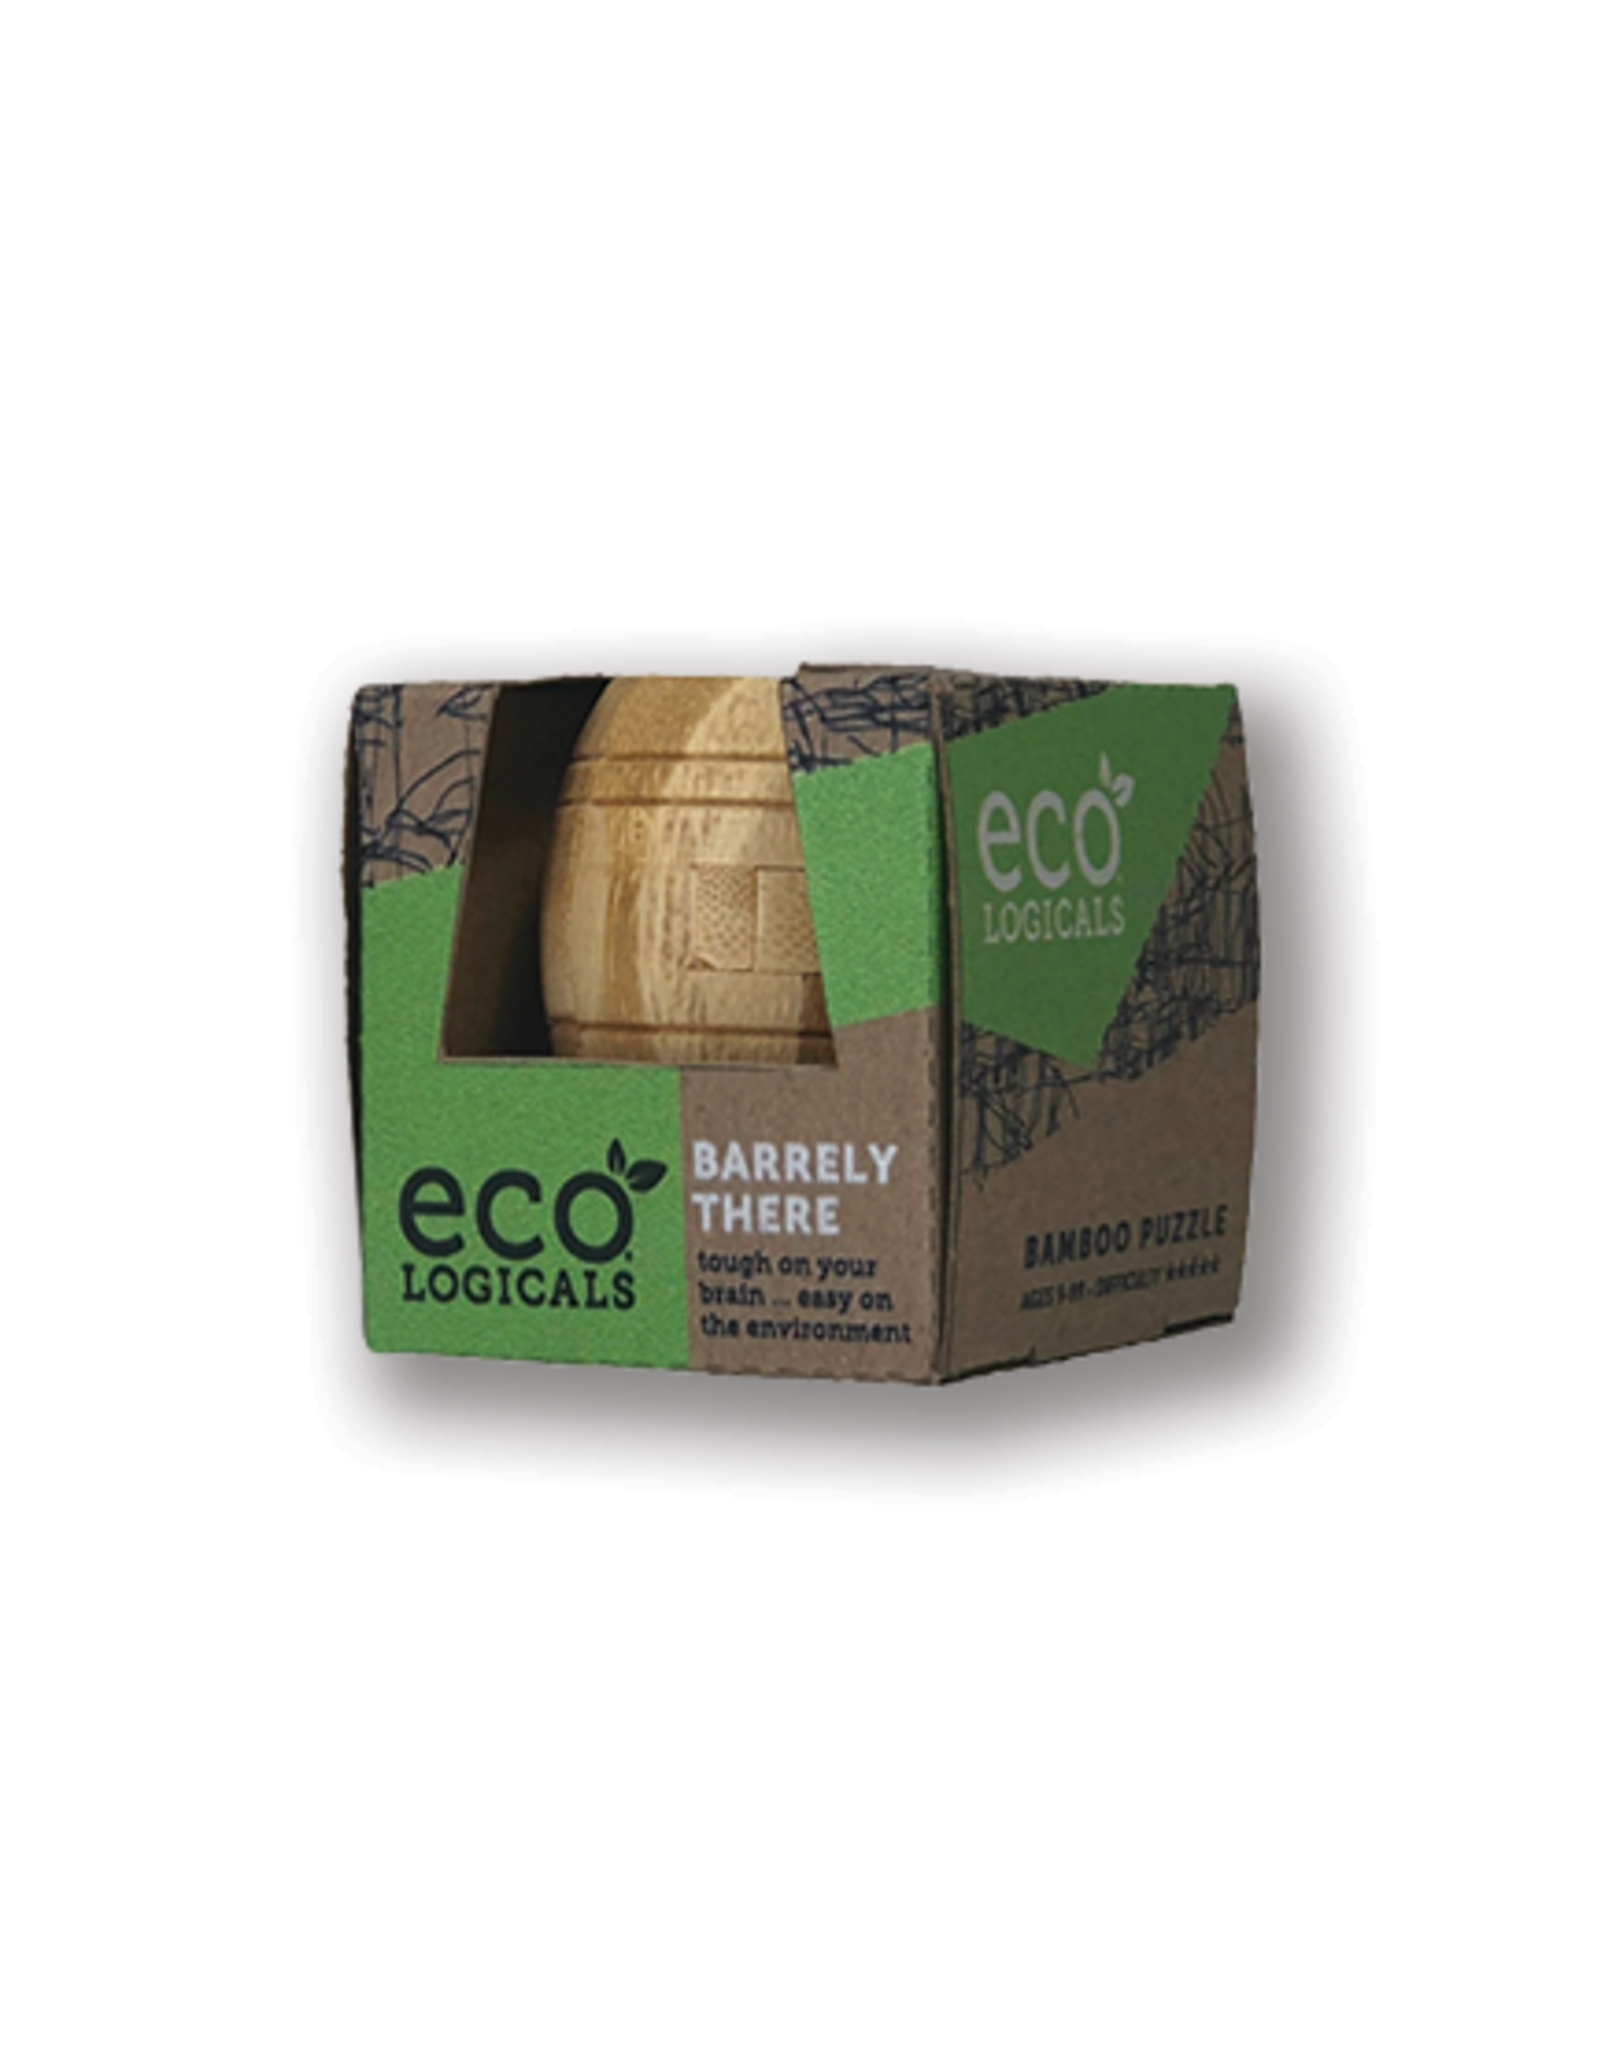 Project Genius Ecologicals Mini Bamboo Puzzle Barrely There